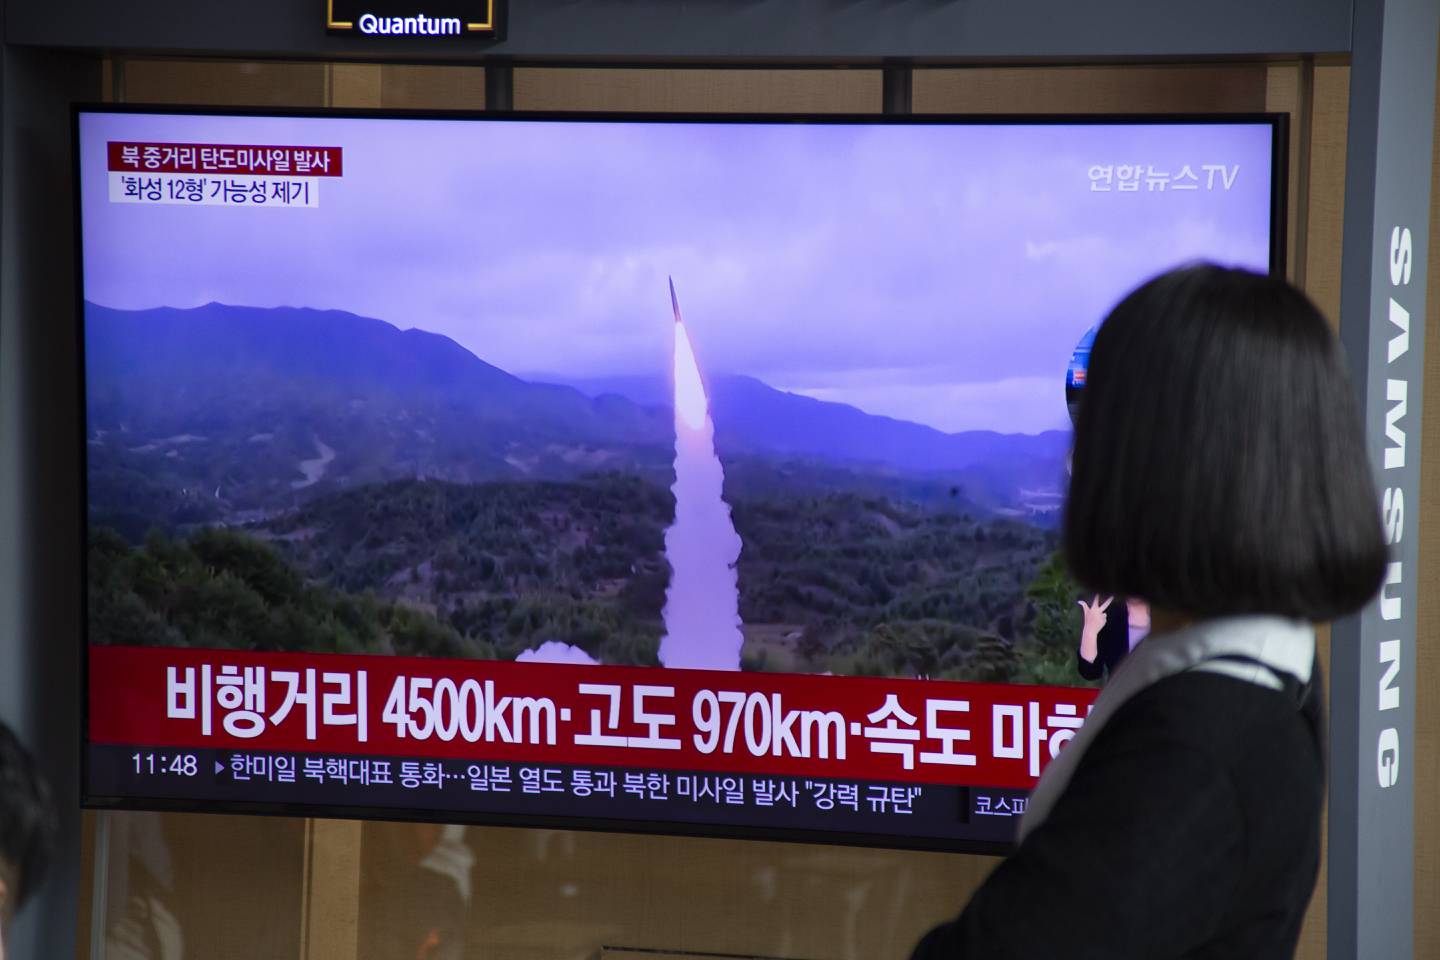 A woman watches the news at a station in Seoul, South Korea, on Tuesday after North Korea launched a ballistic missile over Japan into the Pacific Ocean. EPA